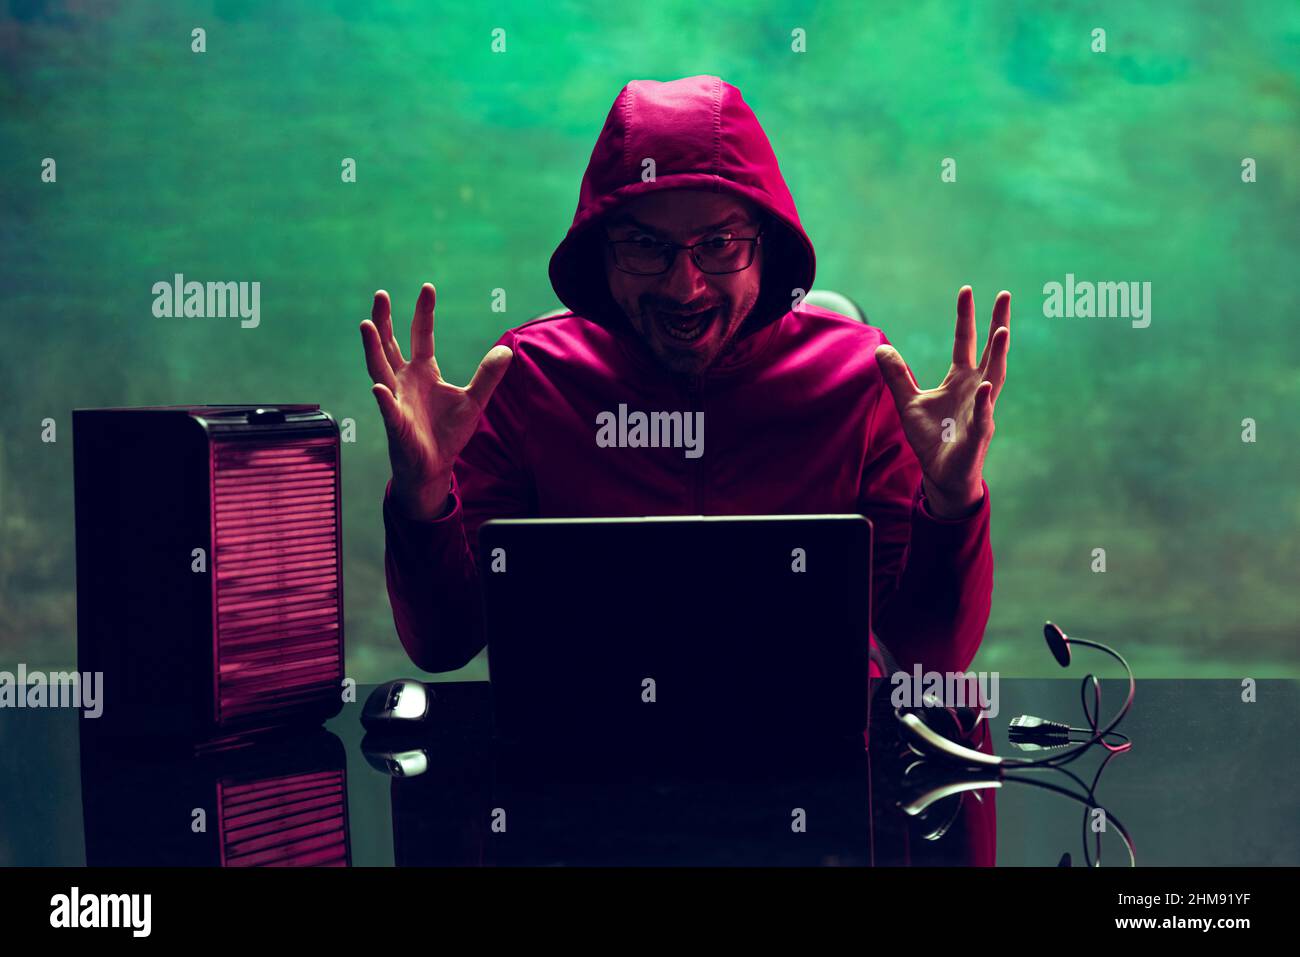 Portrait of man, computer geek, hacker working with laptop, breaking security system isolated over dark green background in neon Stock Photo